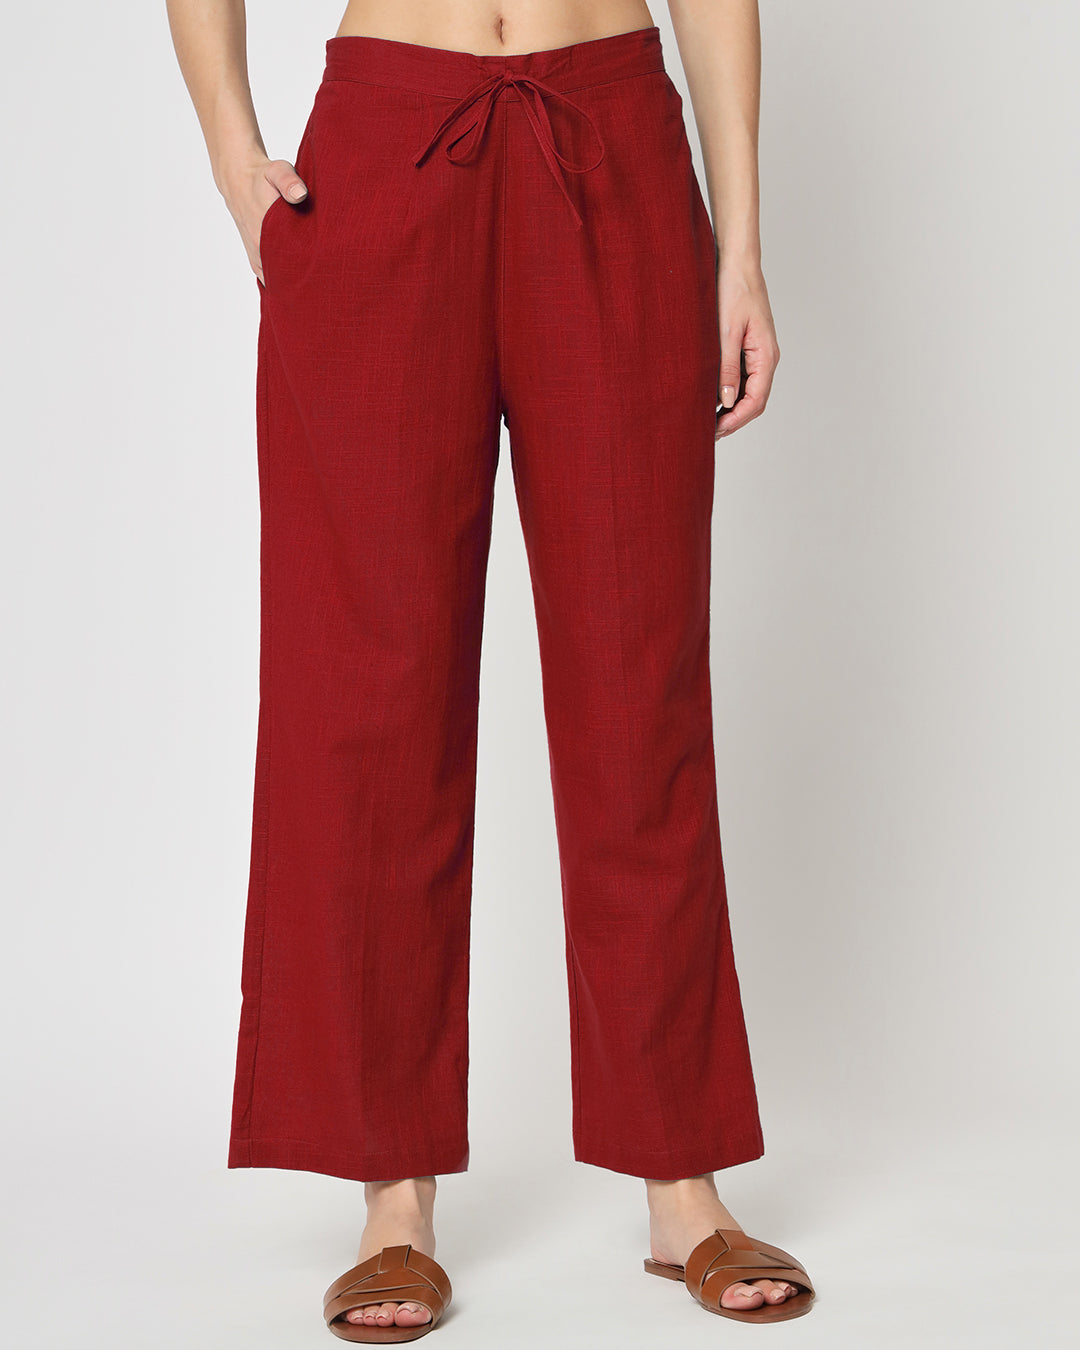 Combo: Black & Classic Red Straight Pants- Set of 2